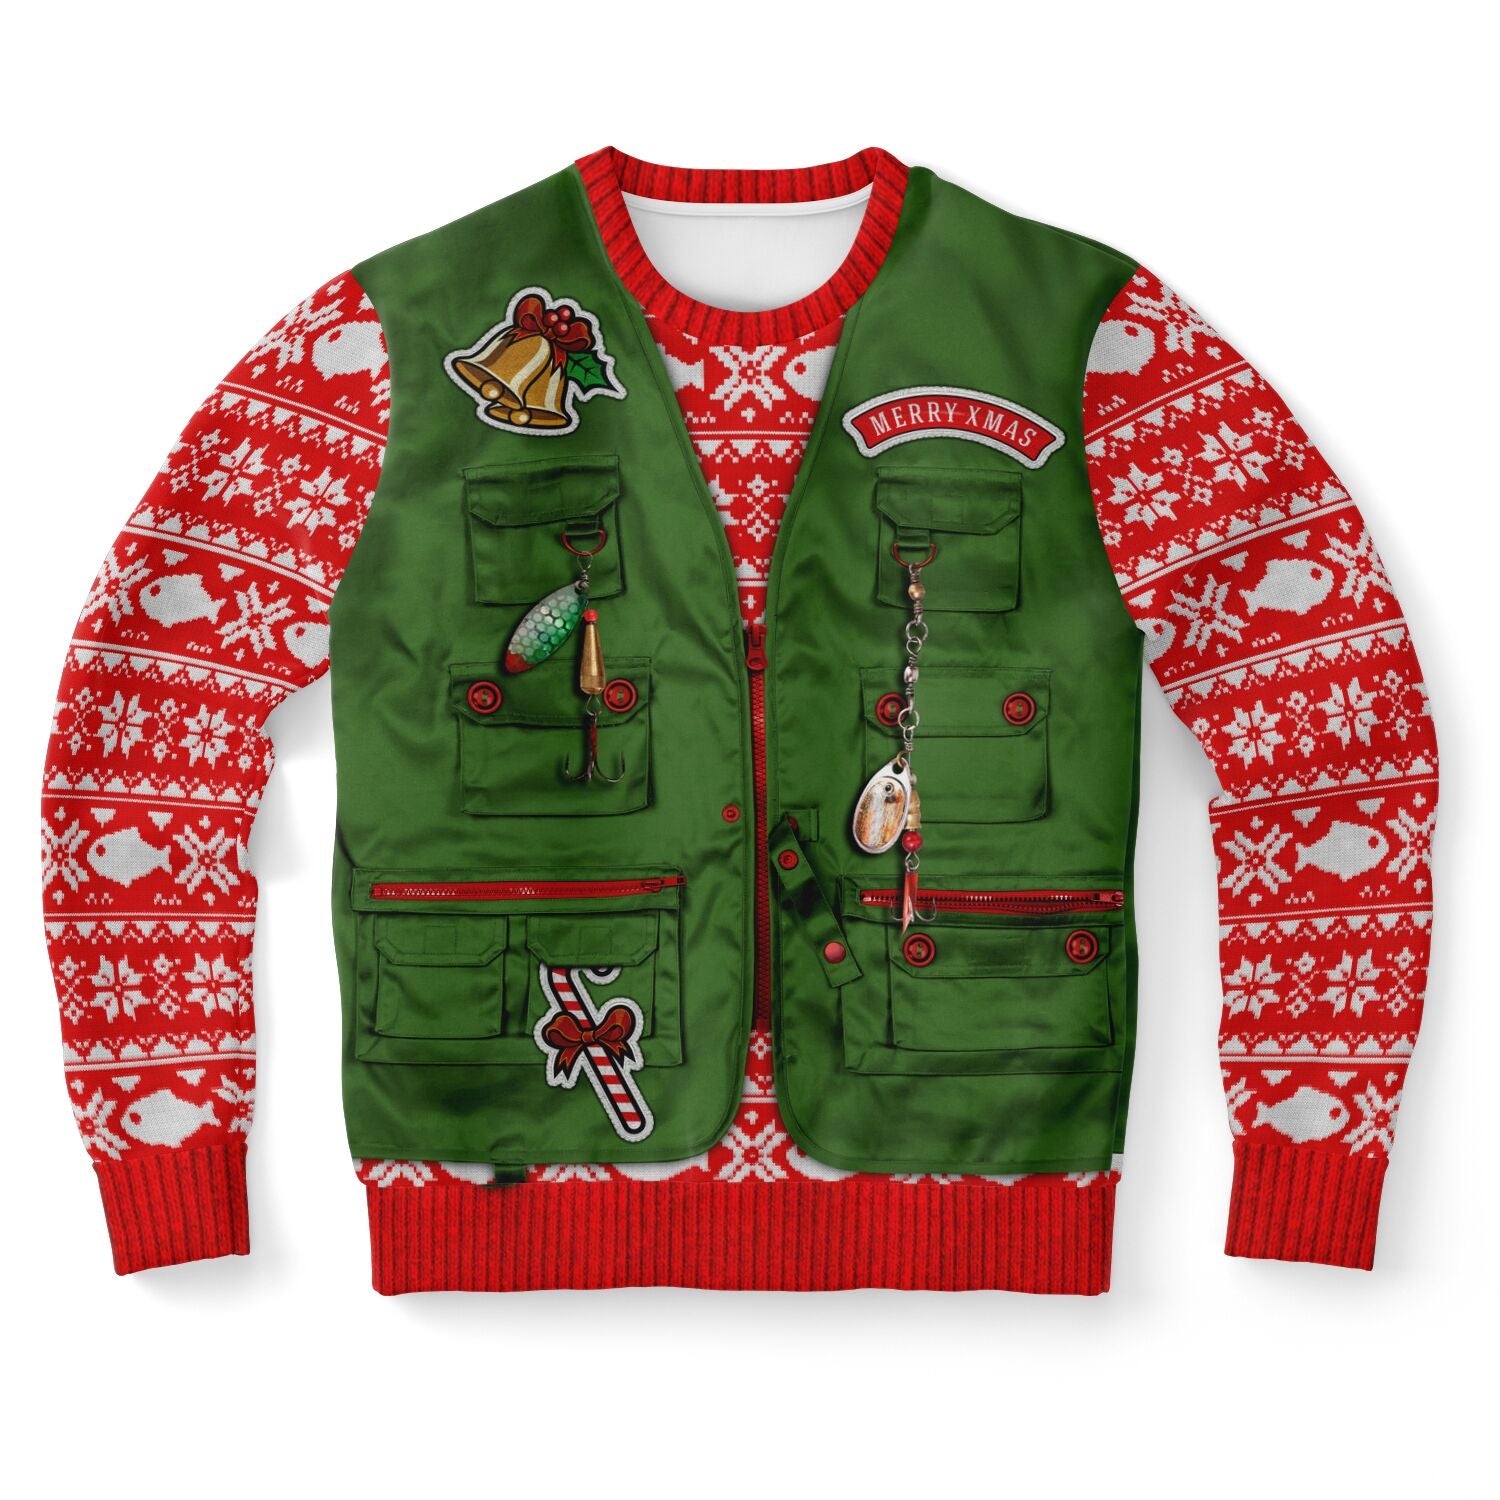 Merry Fishmas Ugly Sweater - XS - Sport Finesse